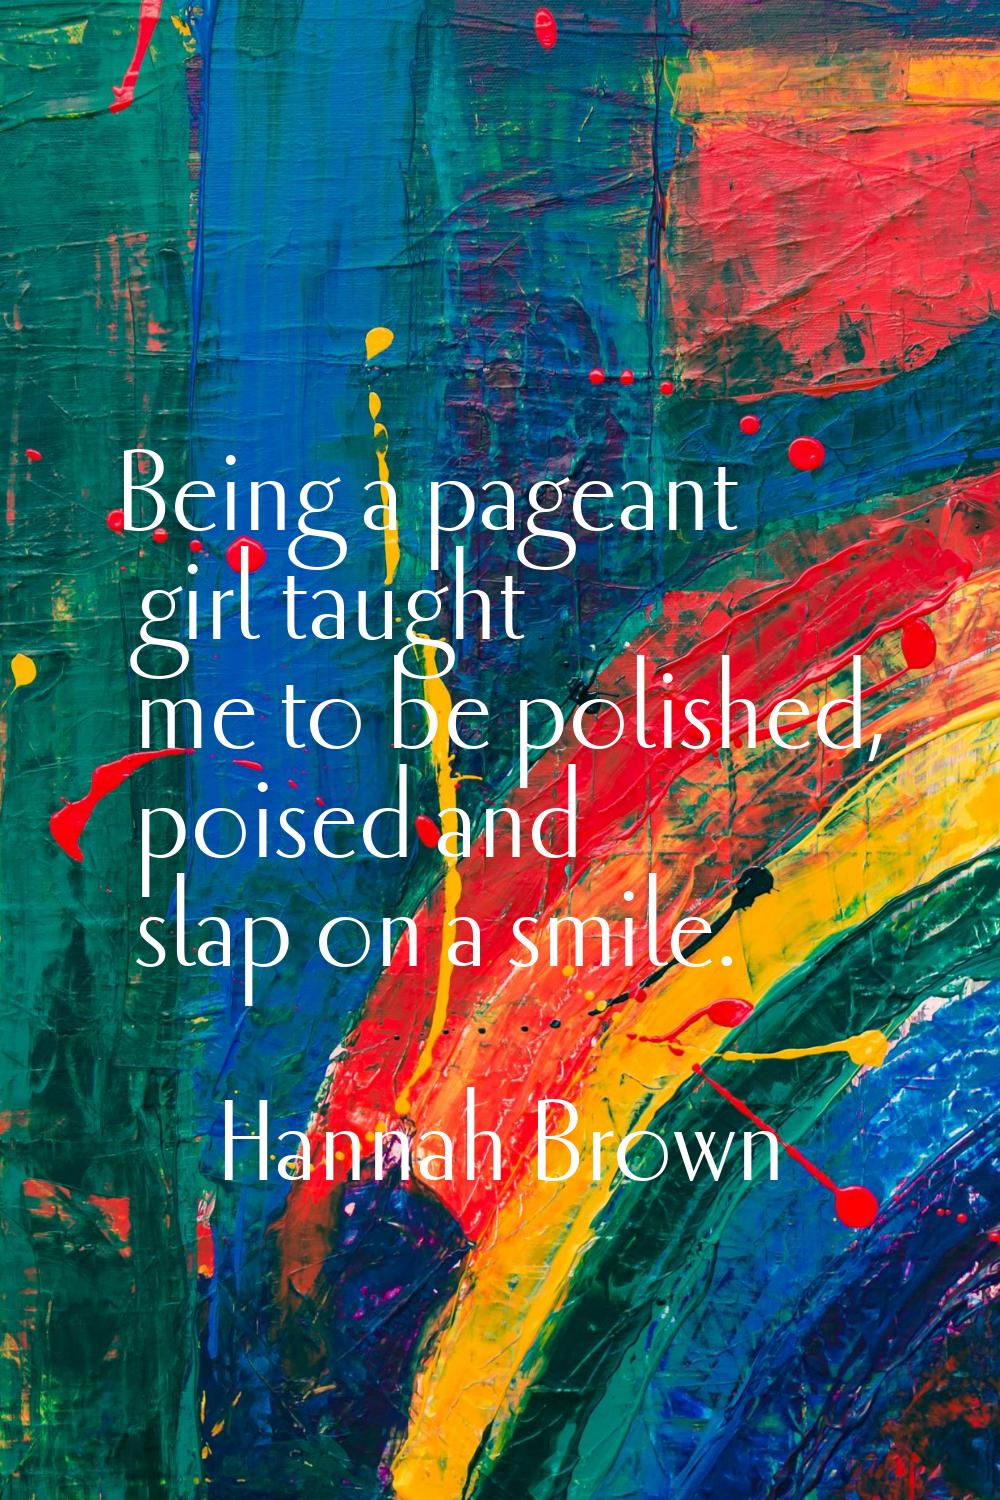 Being a pageant girl taught me to be polished, poised and slap on a smile.